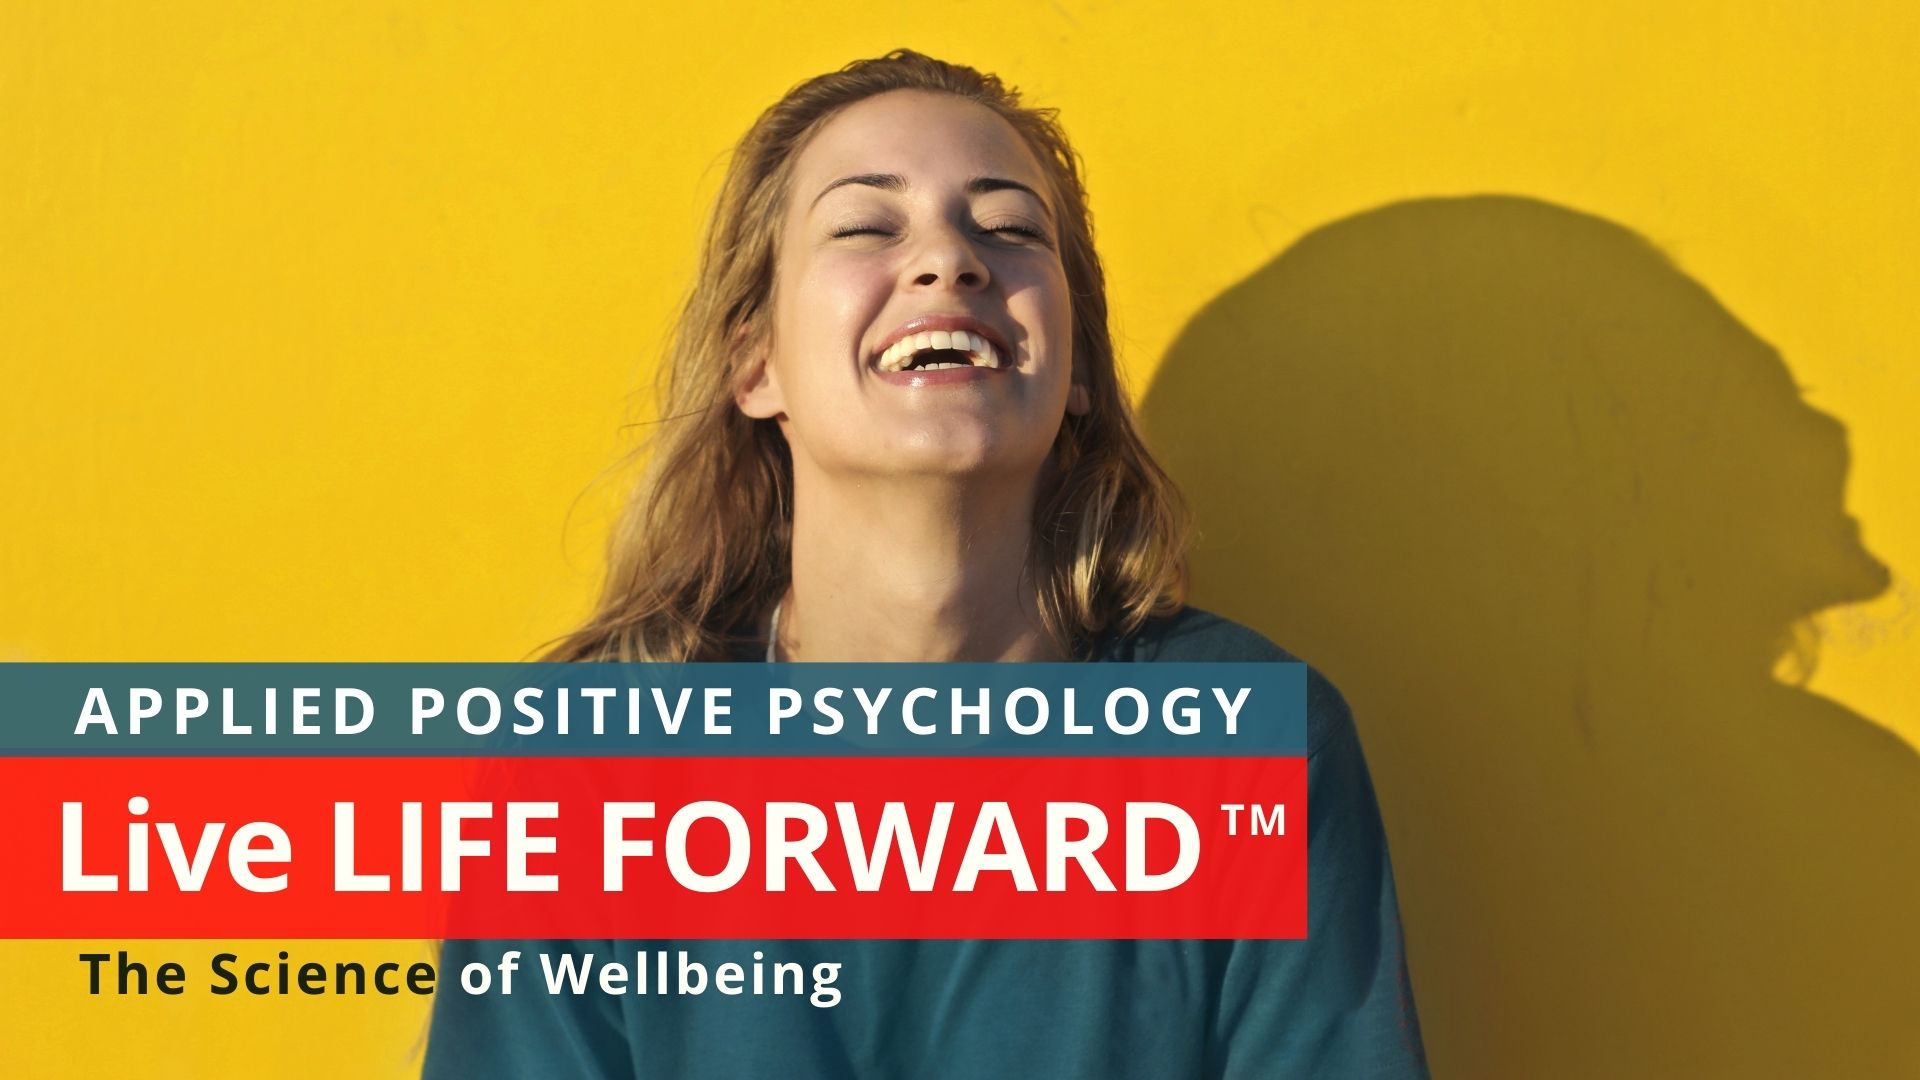 Live Life Forward Student wellbeing program